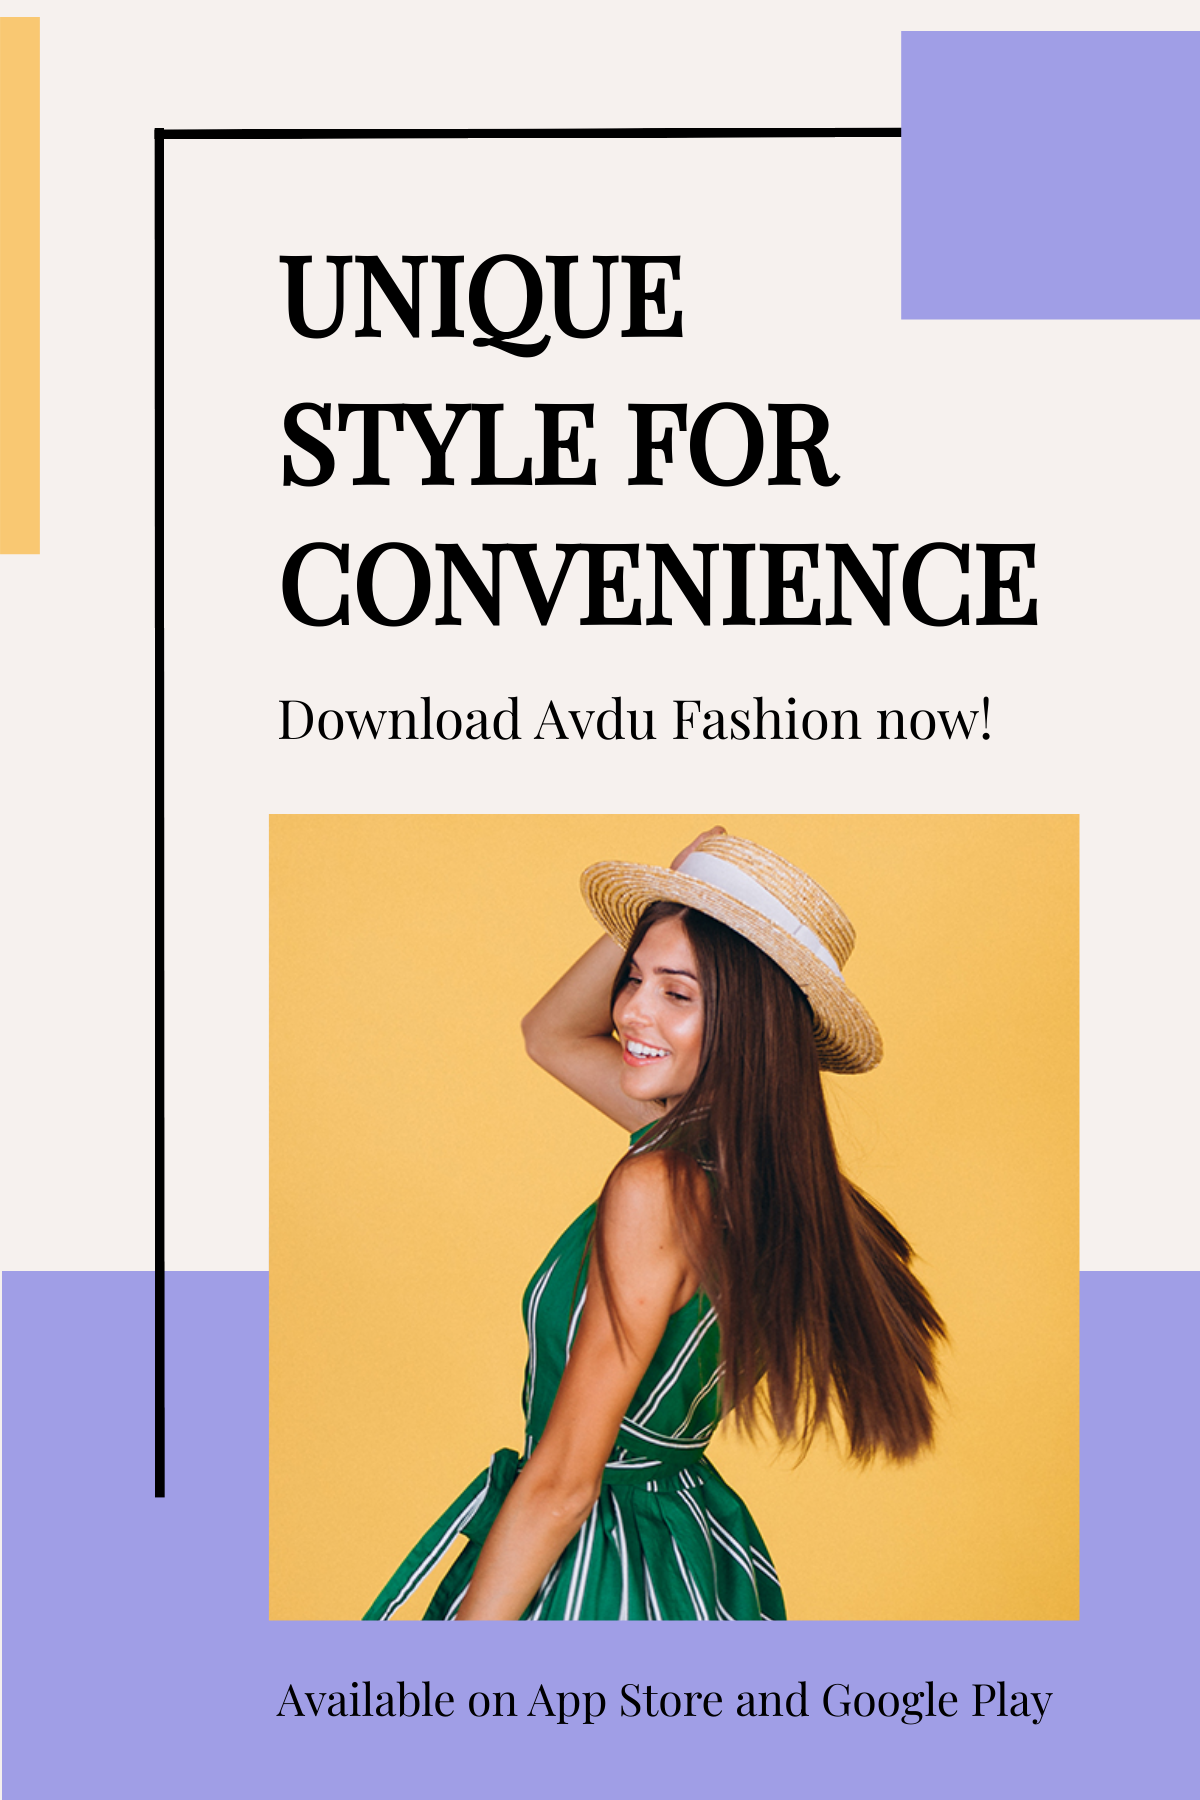 Free Fashion Brands App Promotion Pinterest Pin Template